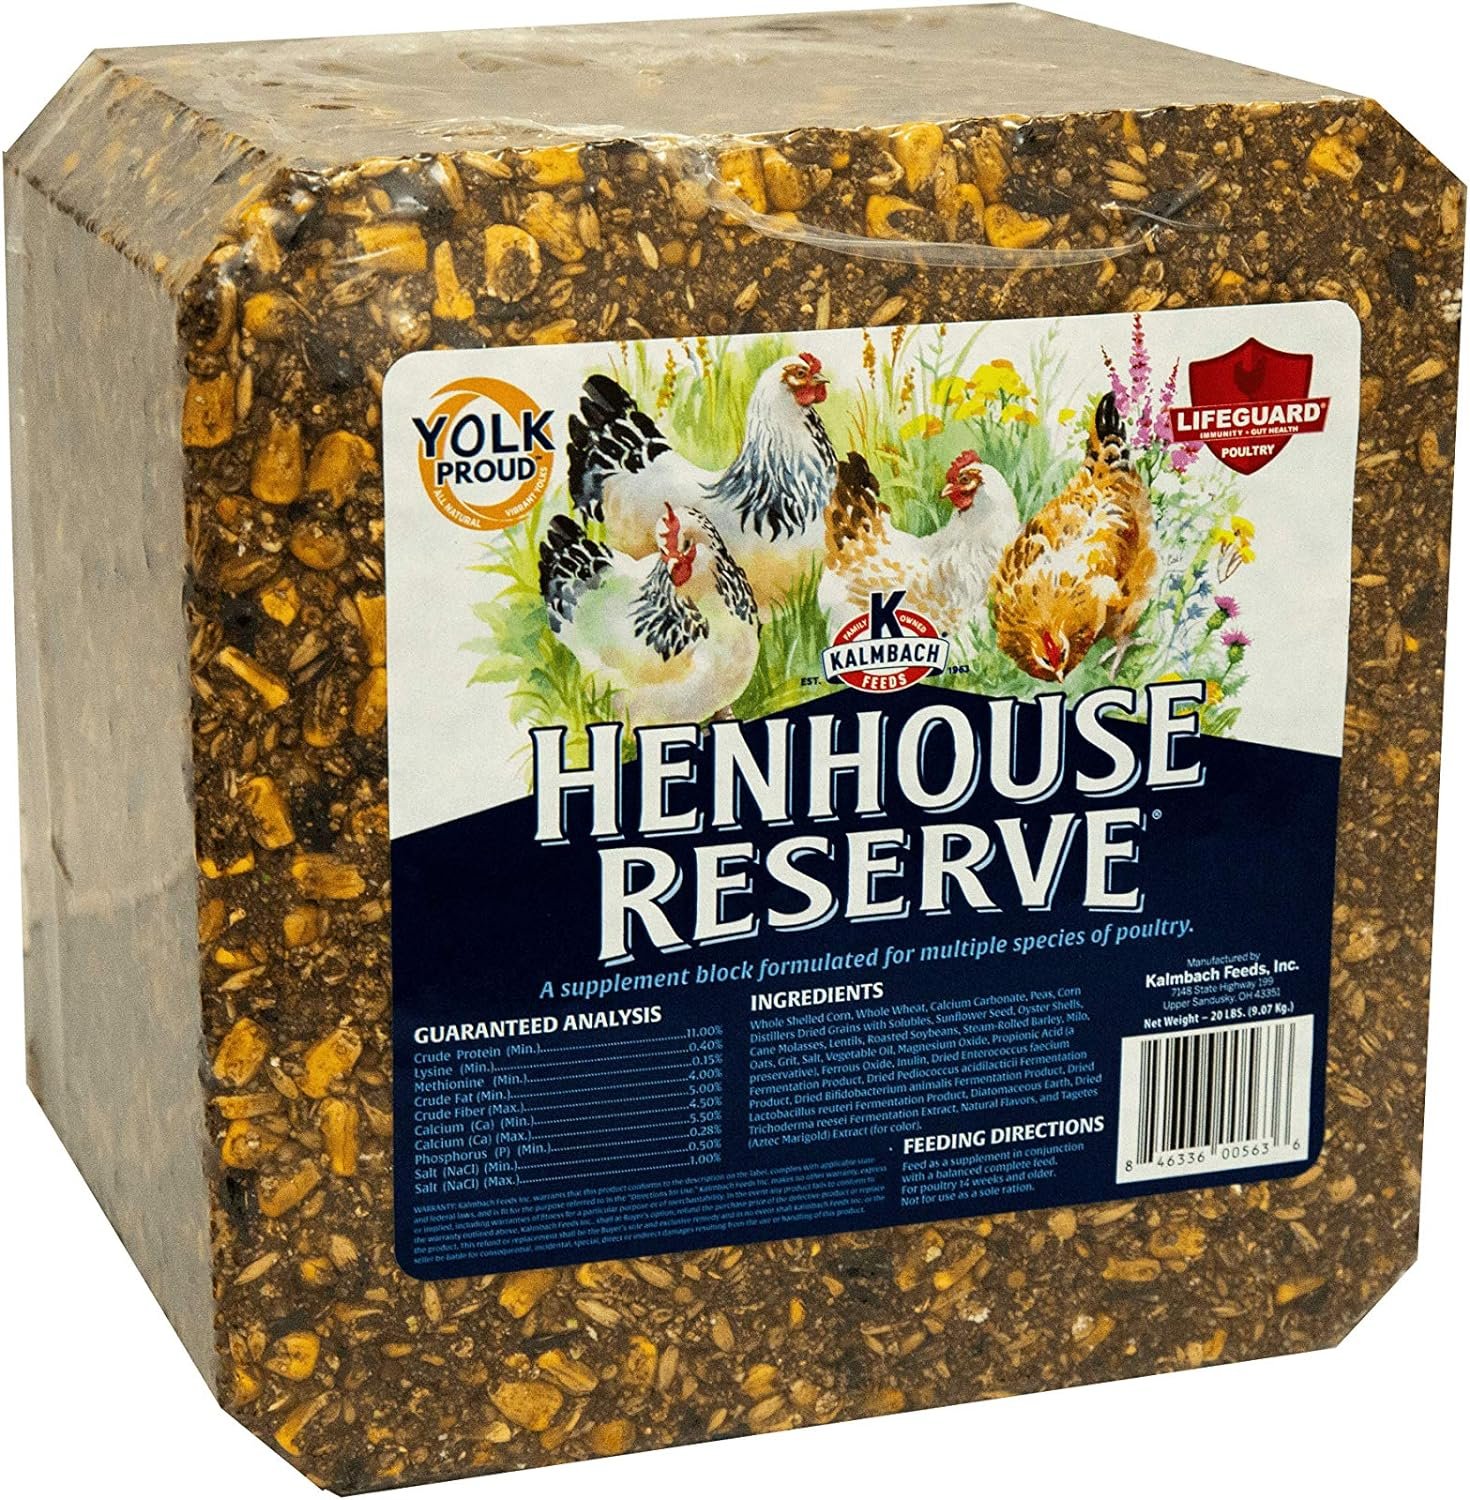 Kalmbach Feeds Henhouse Reserve Supplement Treat Block for Chickens, 20 lb